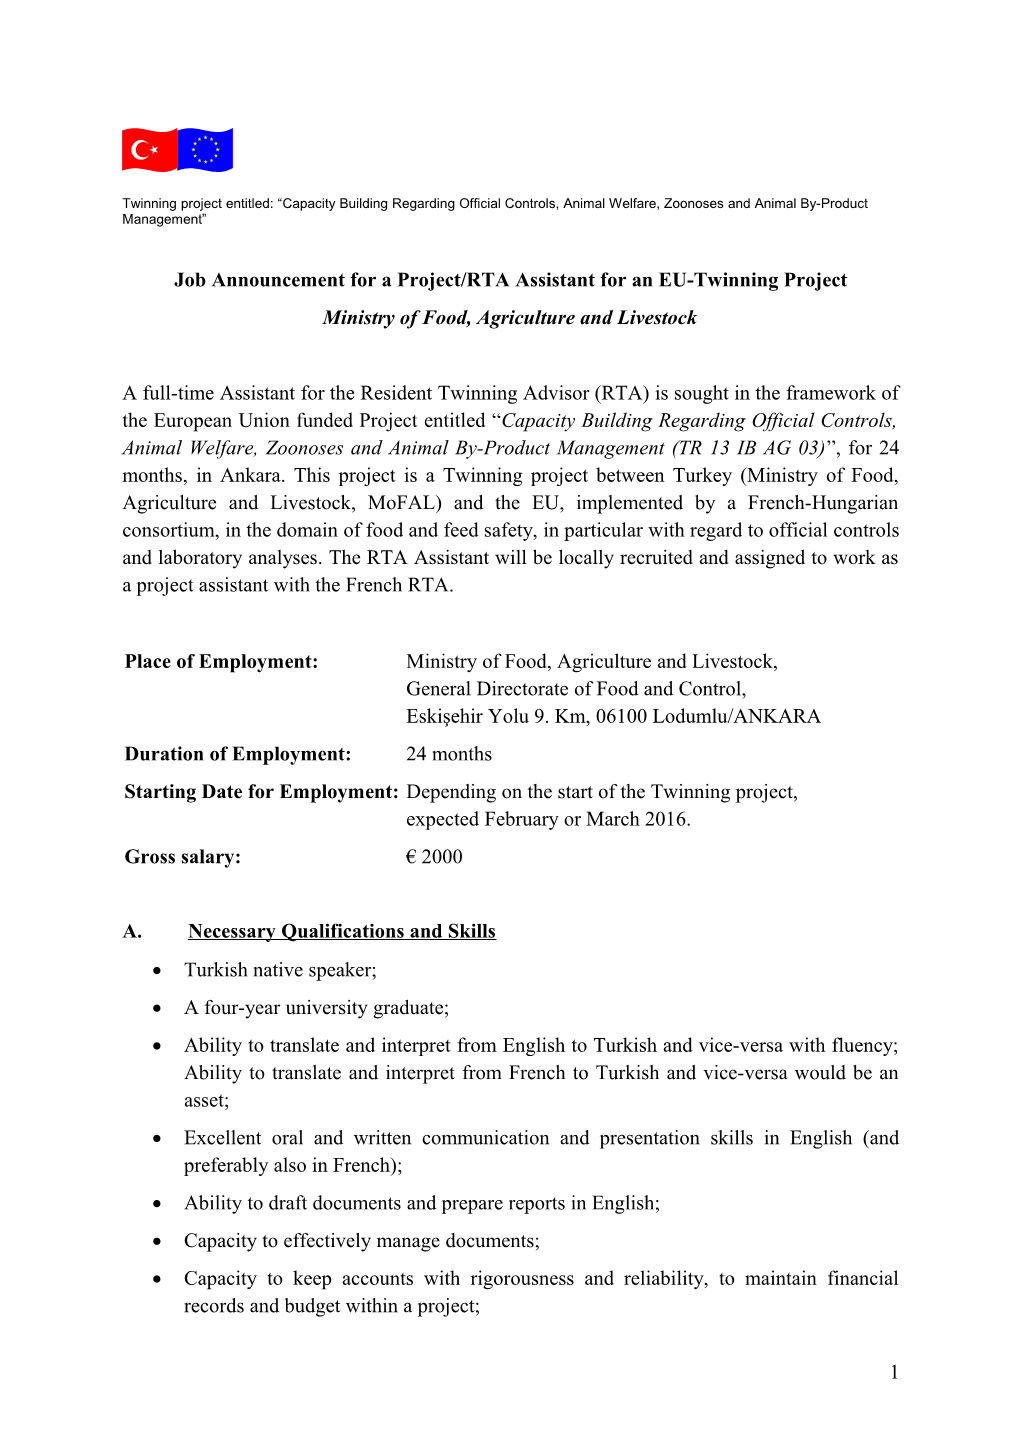 Job Announcement for a Project/RTA Assistant for an EU-Twinning Project